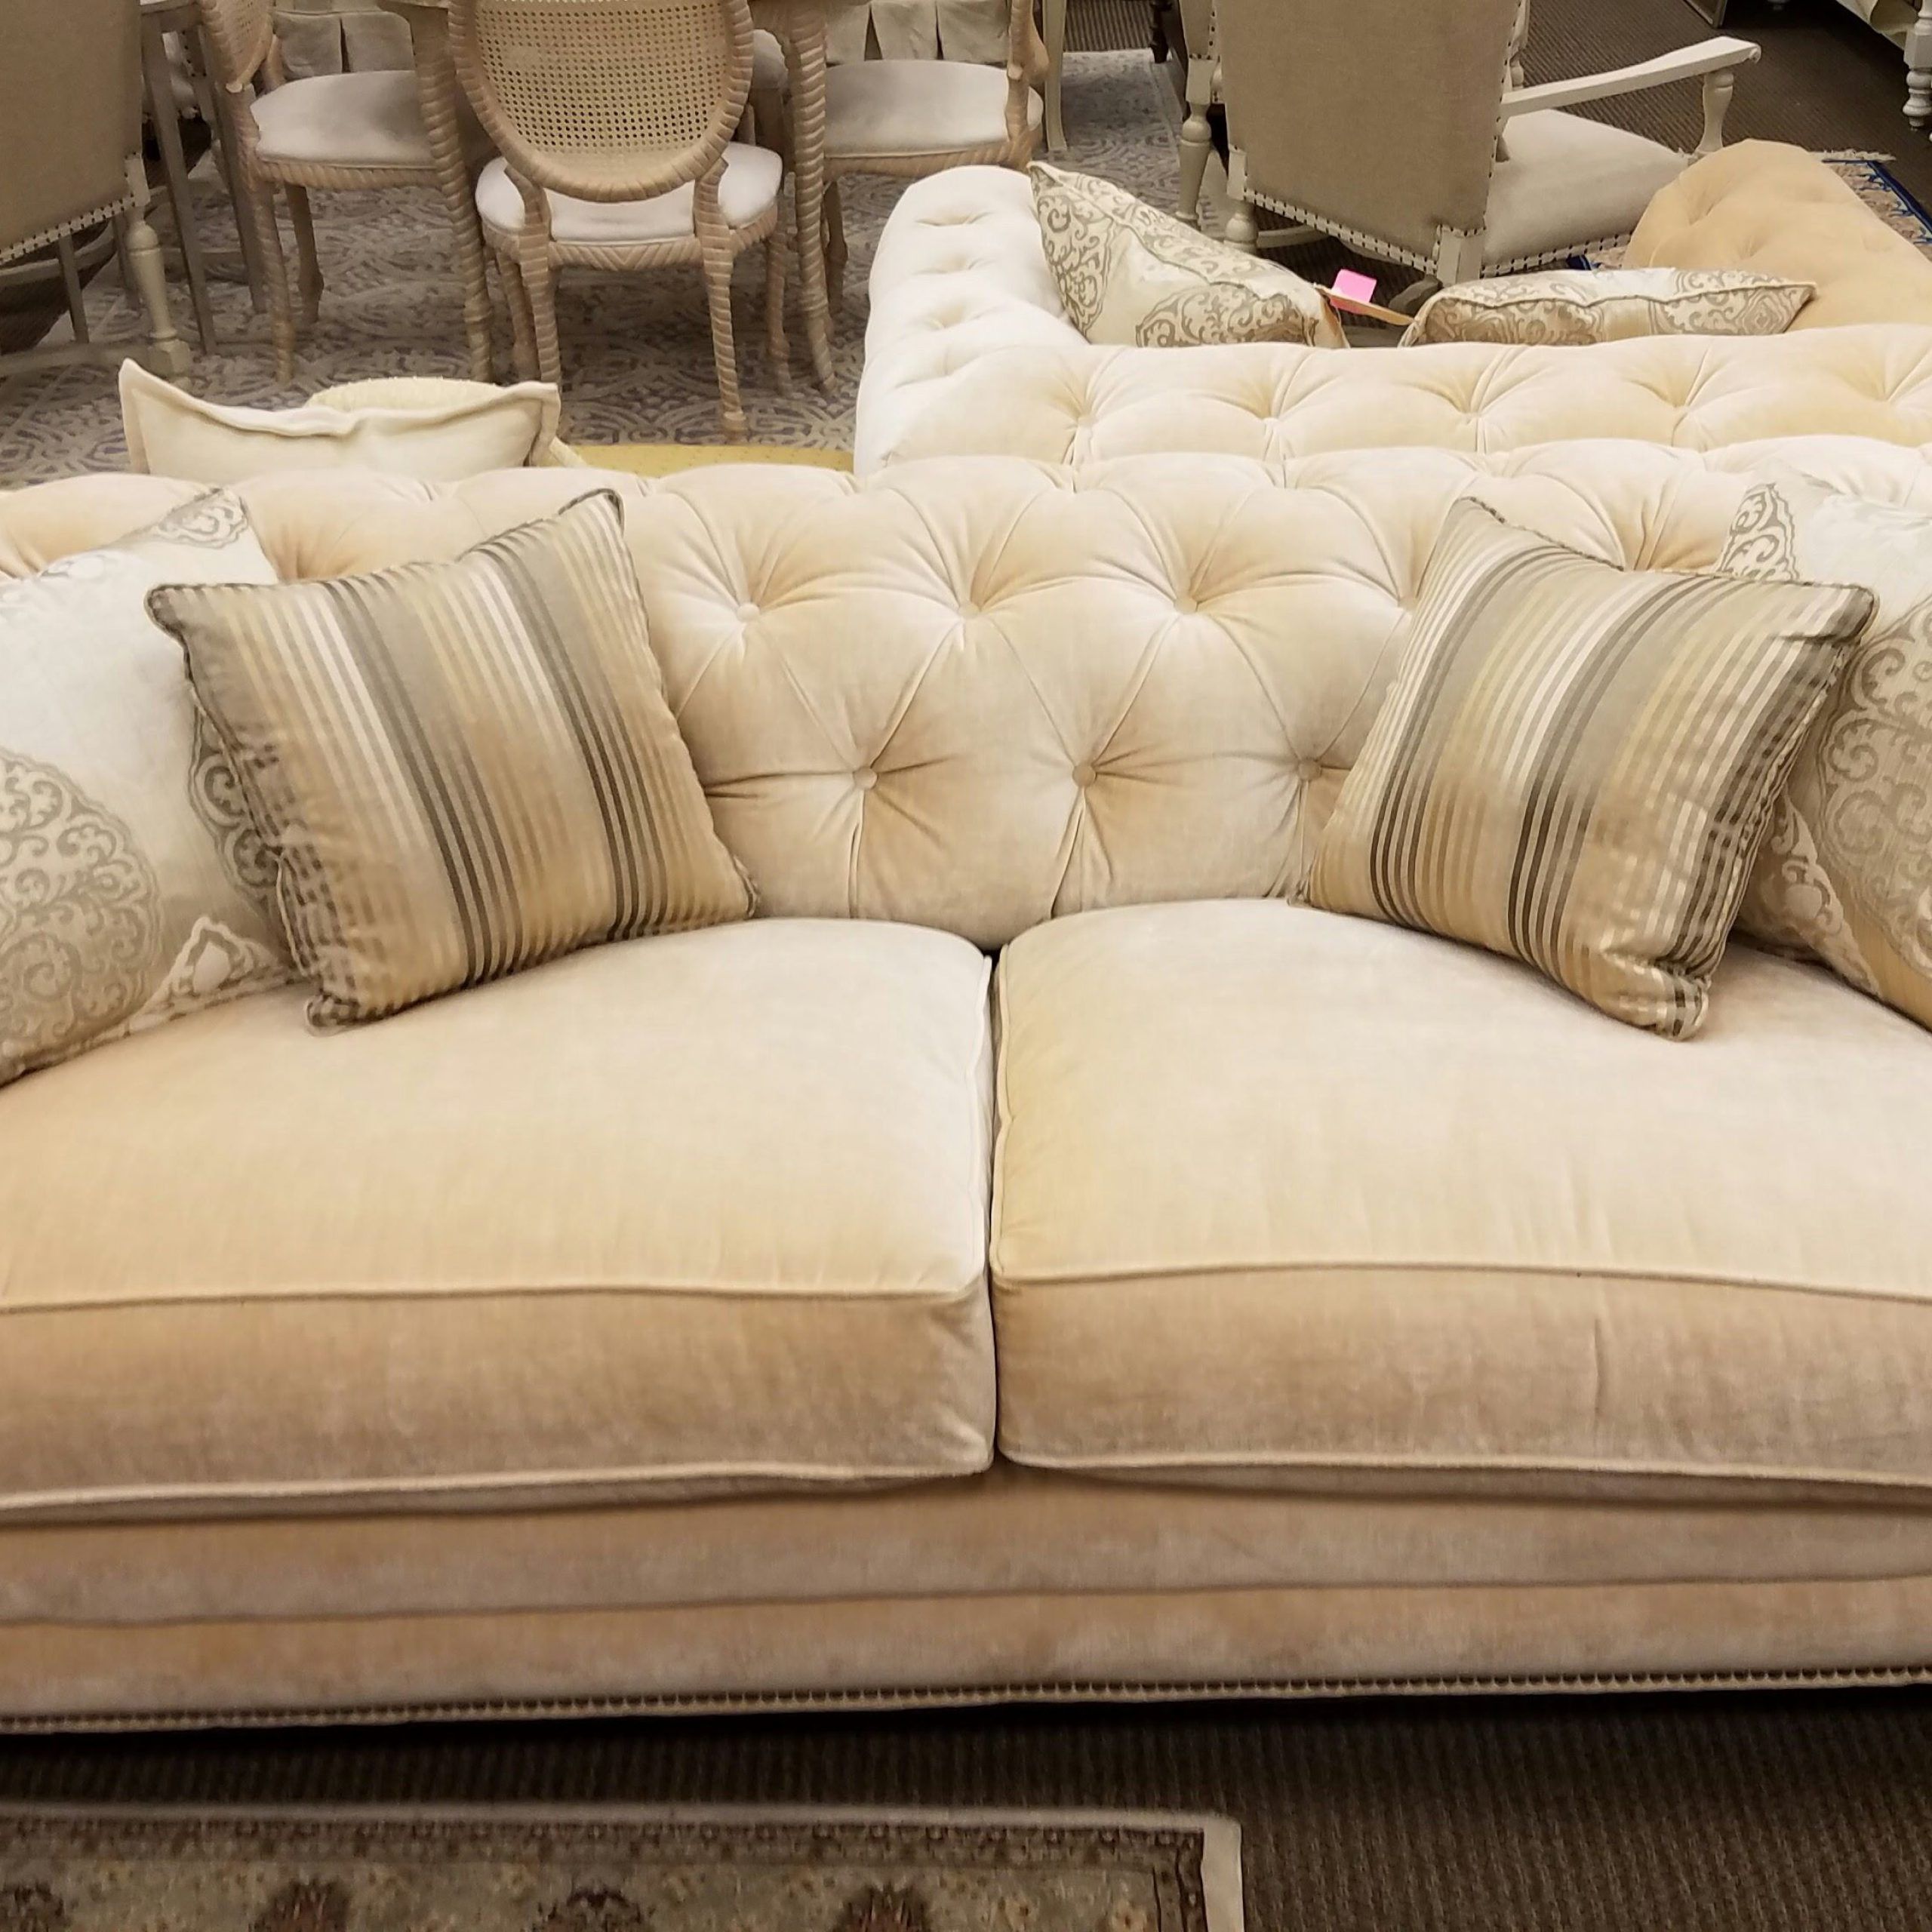 This Elegant Cream Tufted Sofa Is Priced At $ (View 2 of 20)